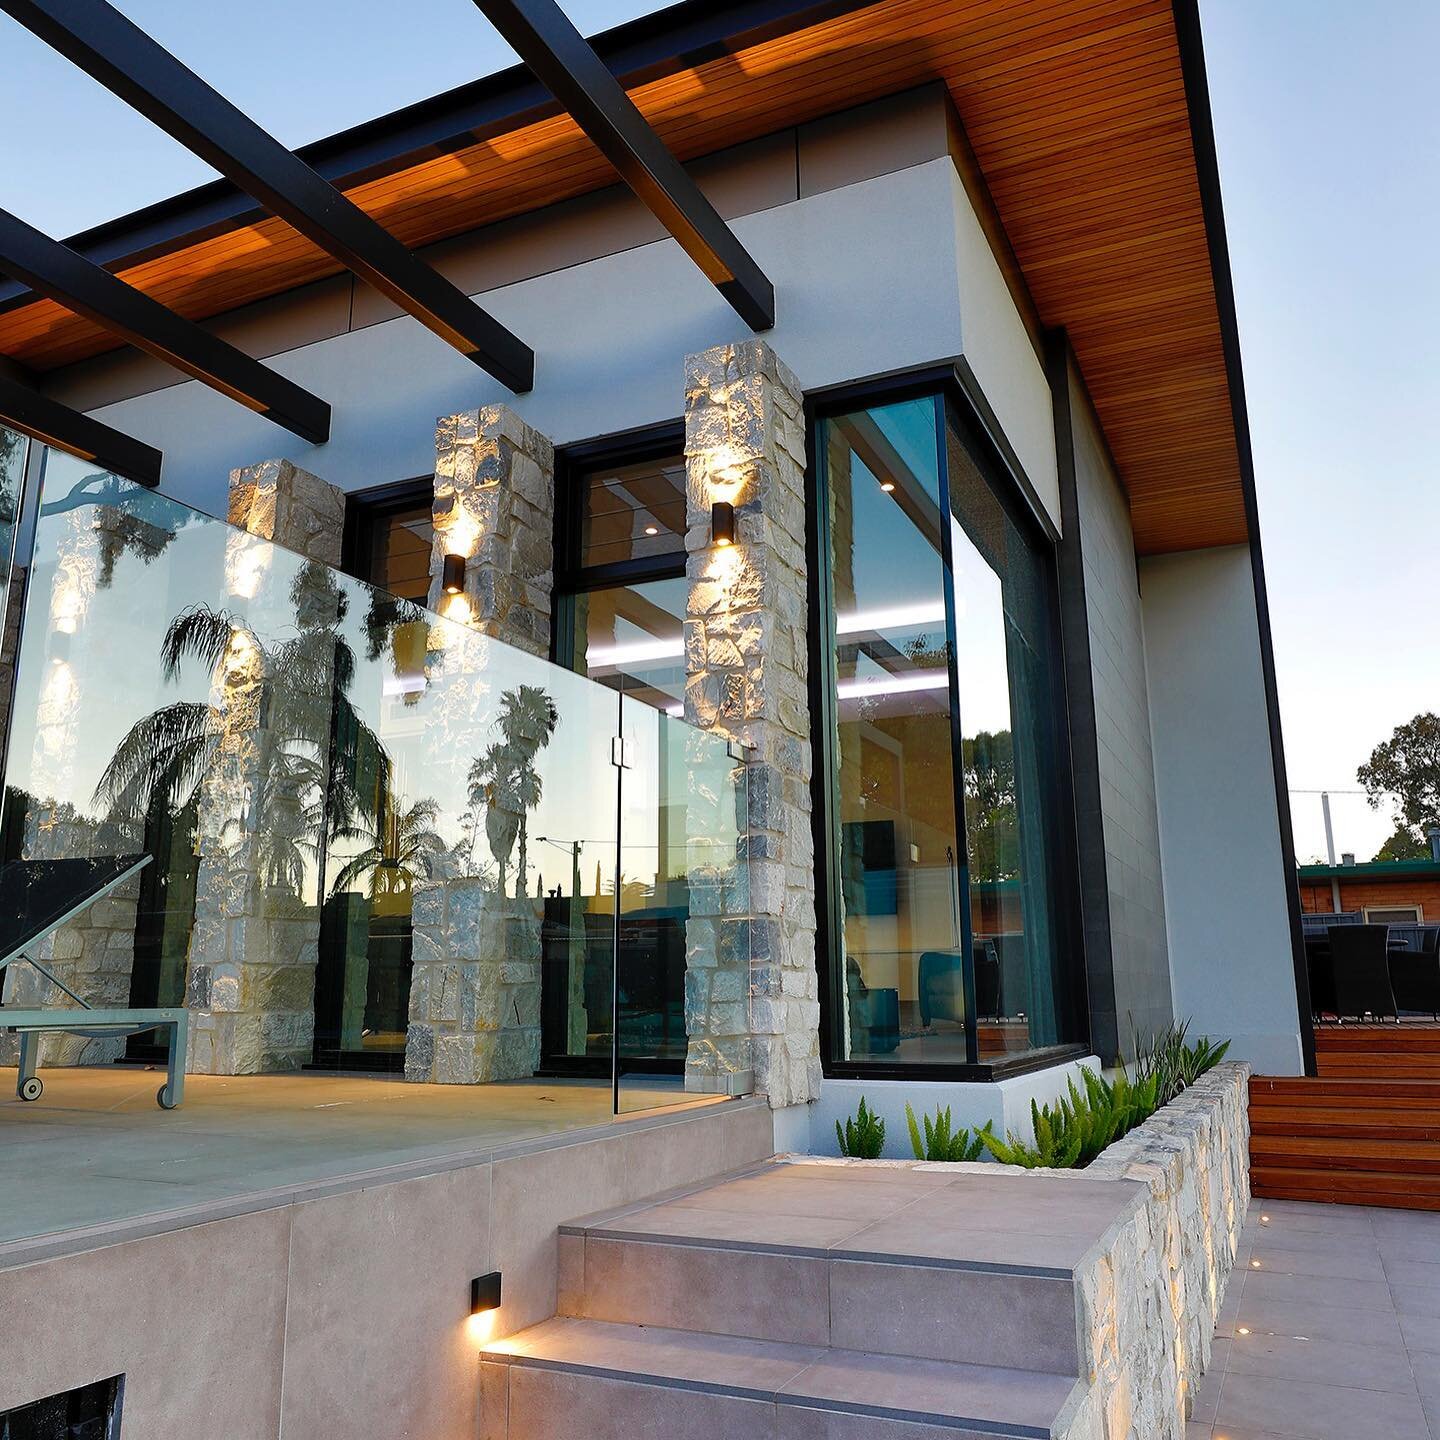 Flashback, one of our faves from 2019. #adelaidearchitecture #moderndesignhomes #alspec #doubleglazed #modernhouses #agg